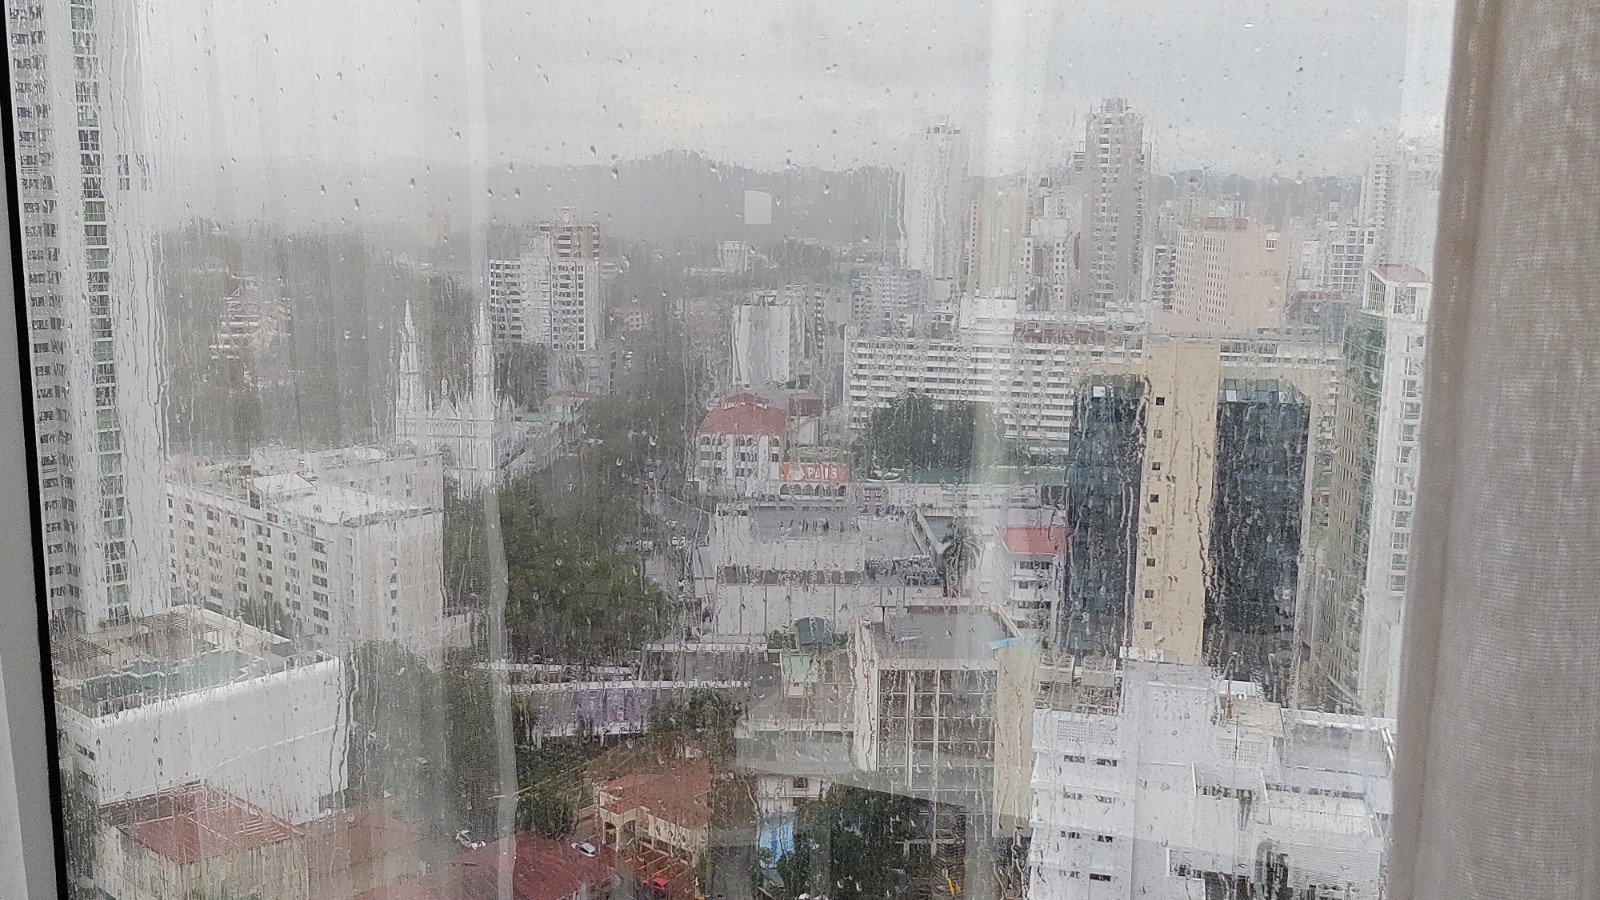 LOOKING OUT THE WINDOW ON THE POURING RAIN COVERING THE CITY.